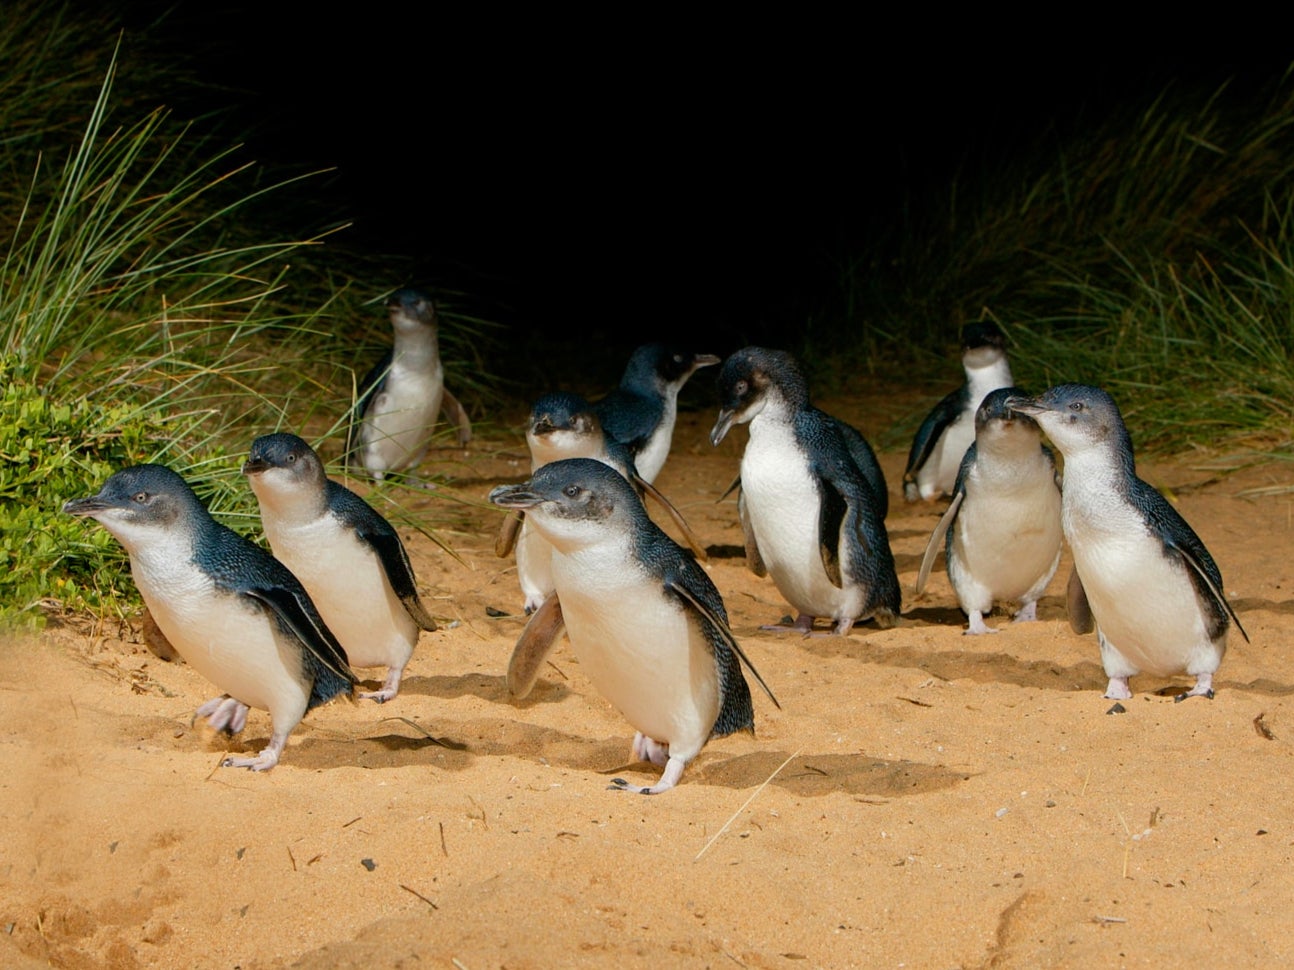 The penguins make their way up the beach